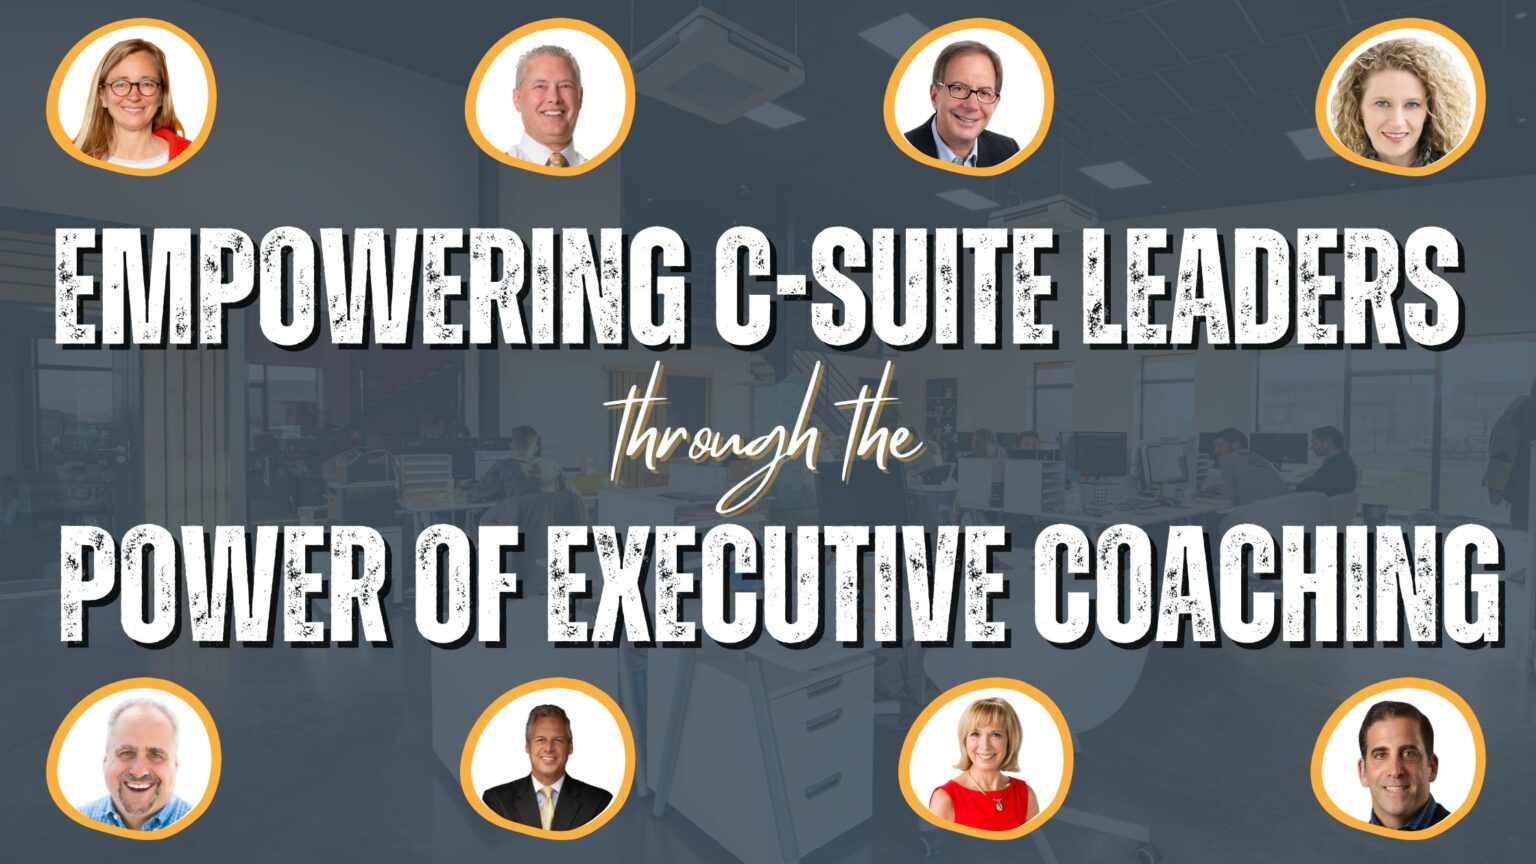 Empowering C-Suite Leaders through the Power of Executive Coaching